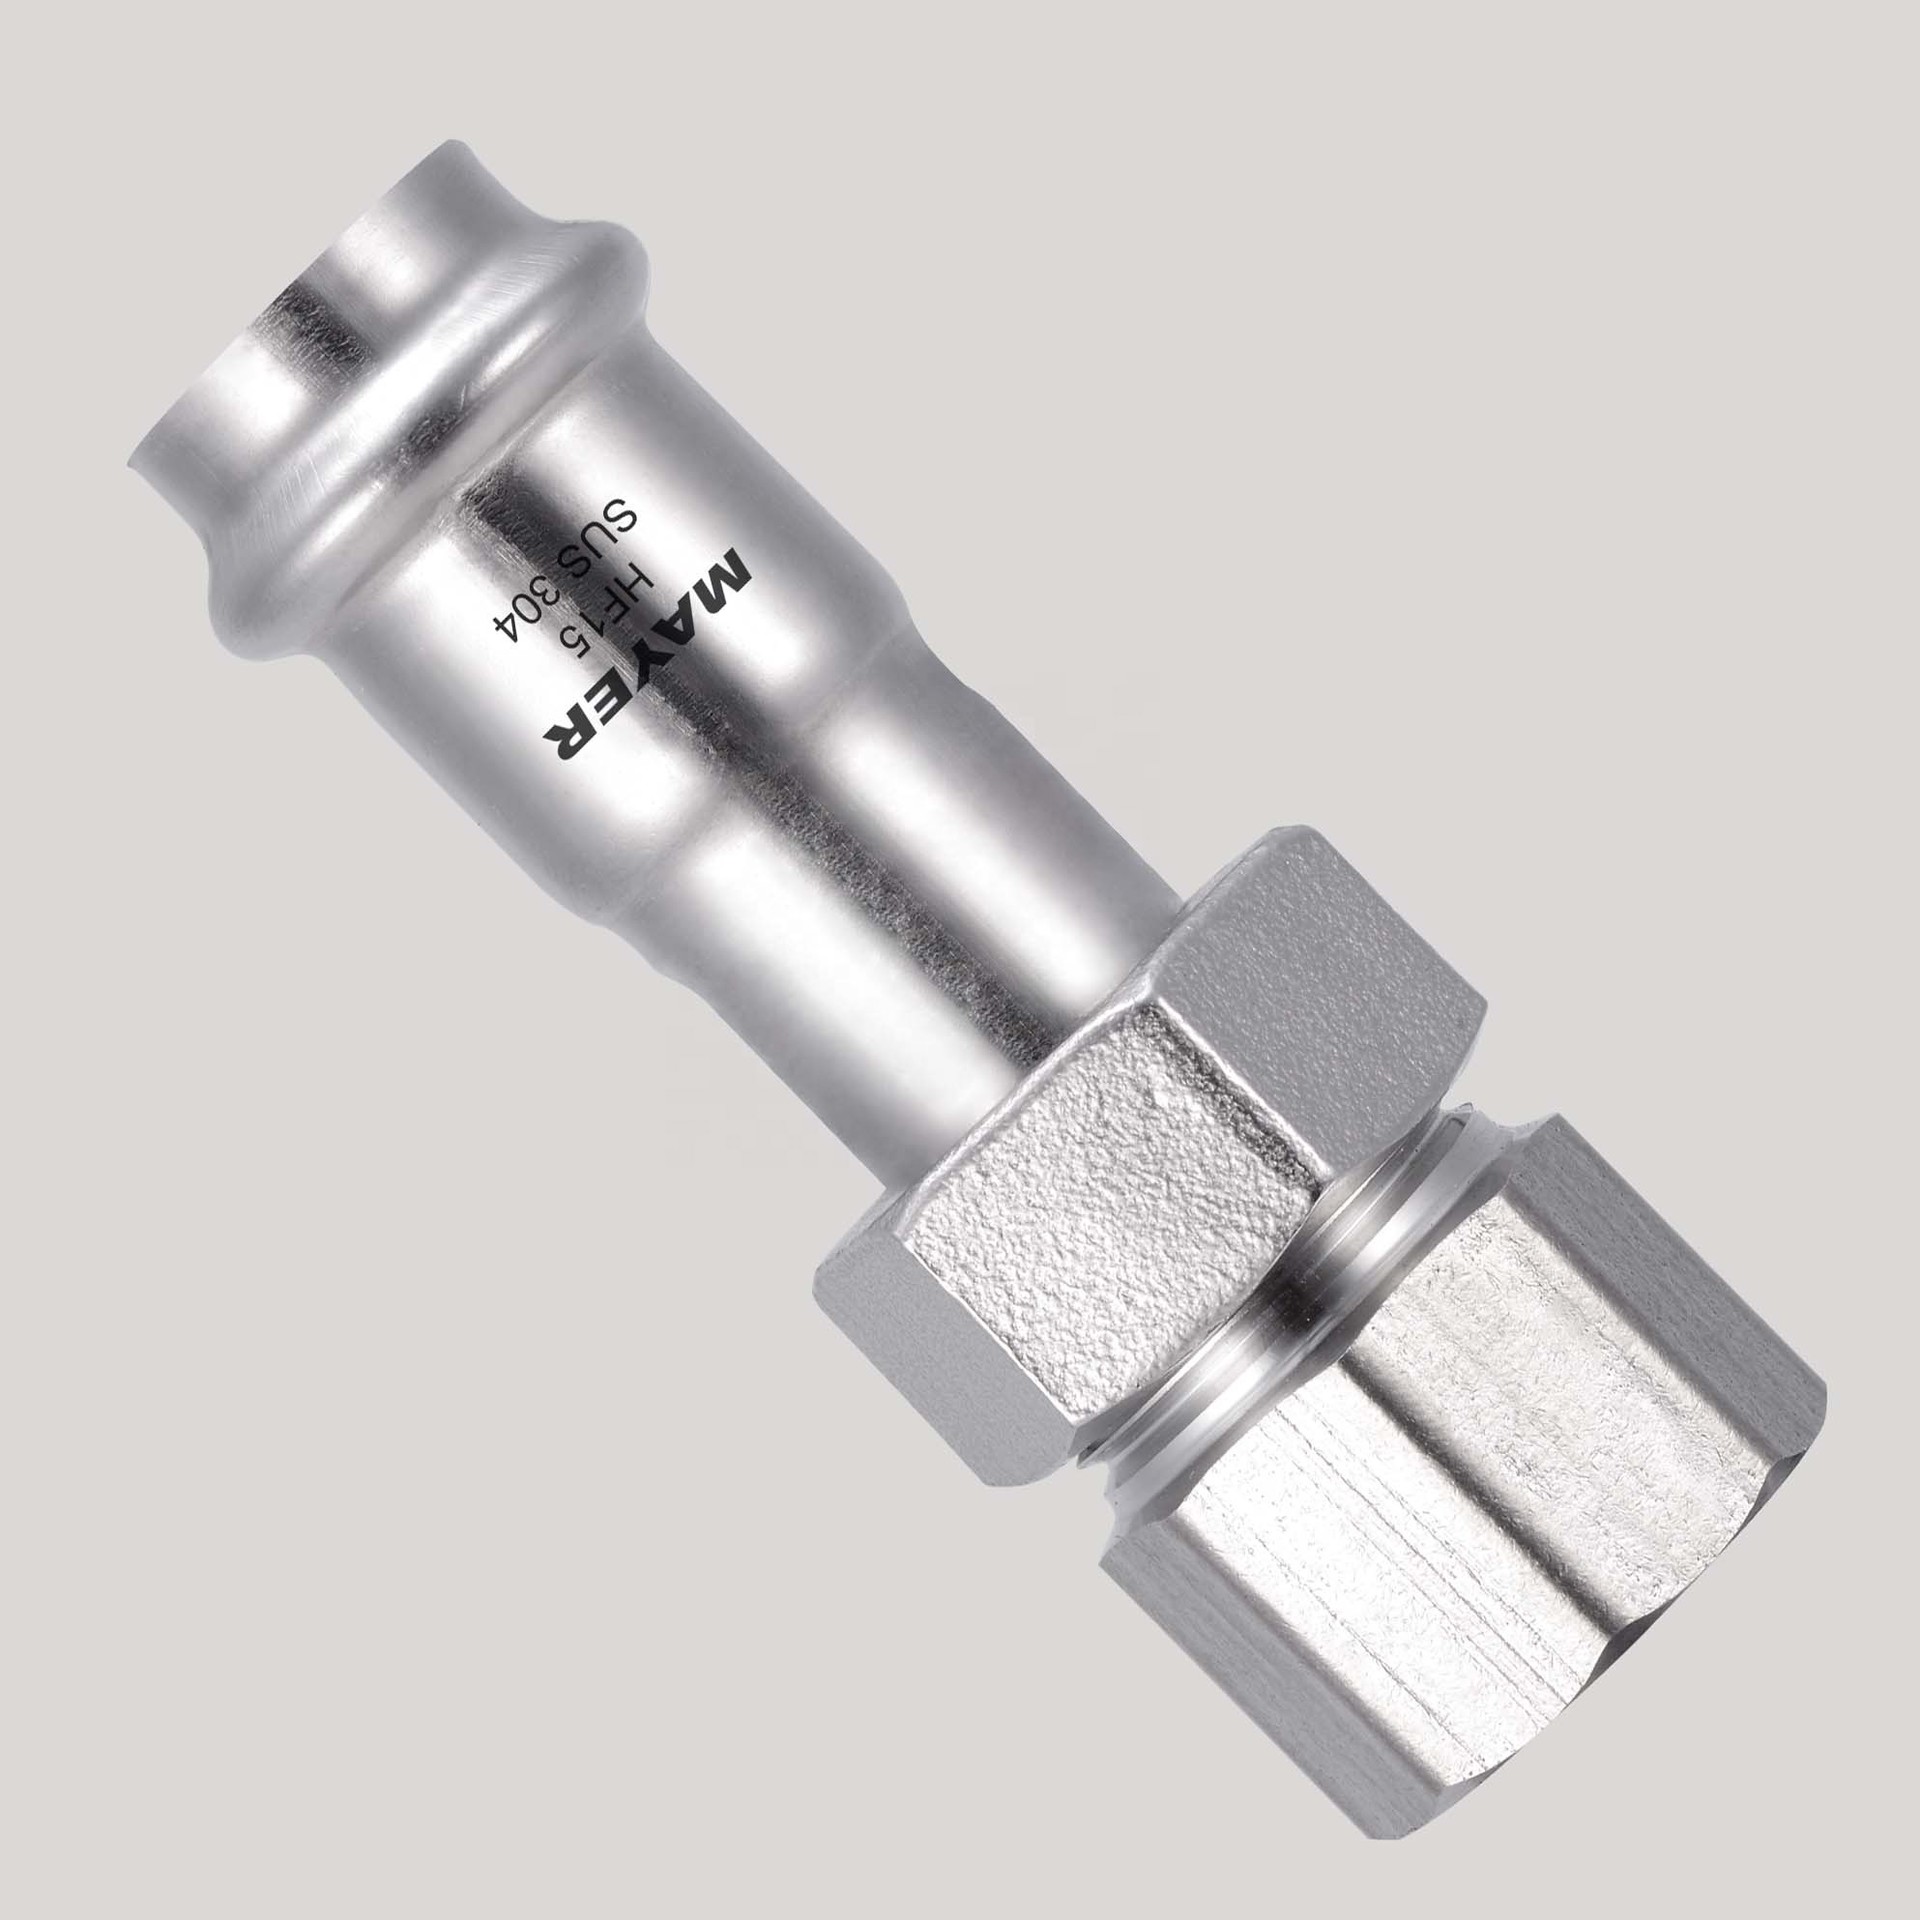 stainless steel union female fitting connector application on pipe connection or machinary